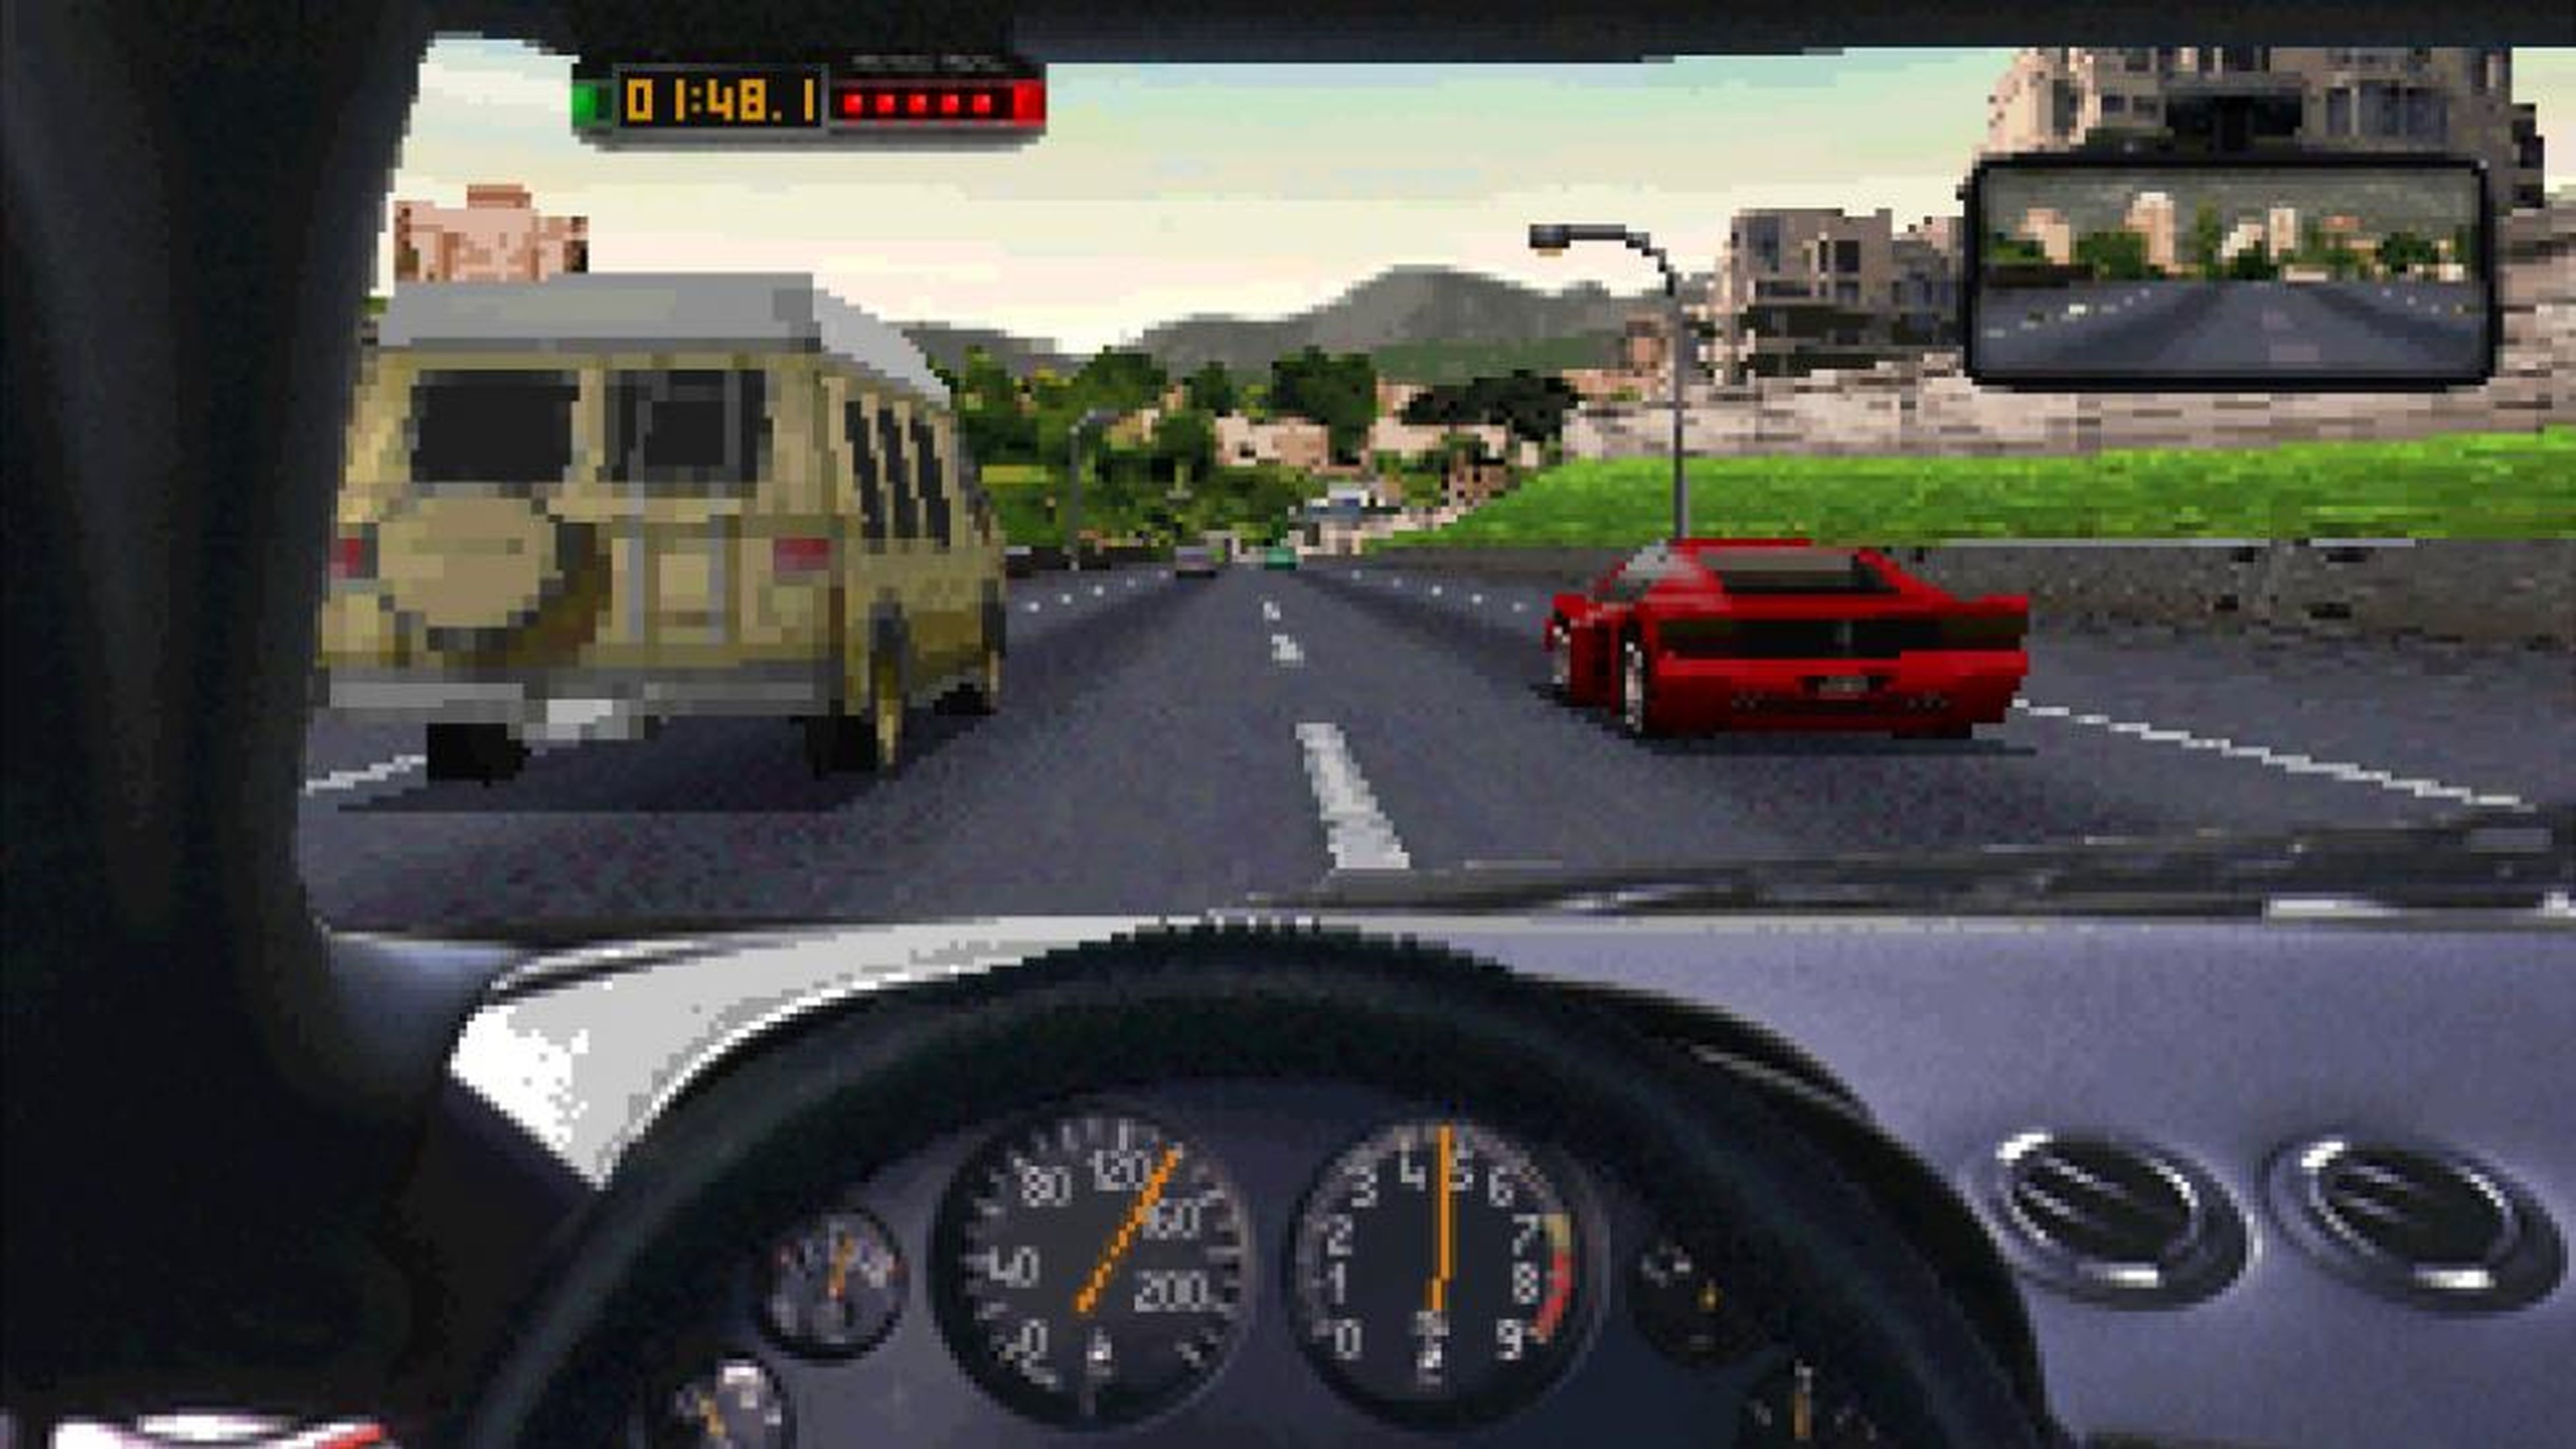 The Need for Speed (1994)